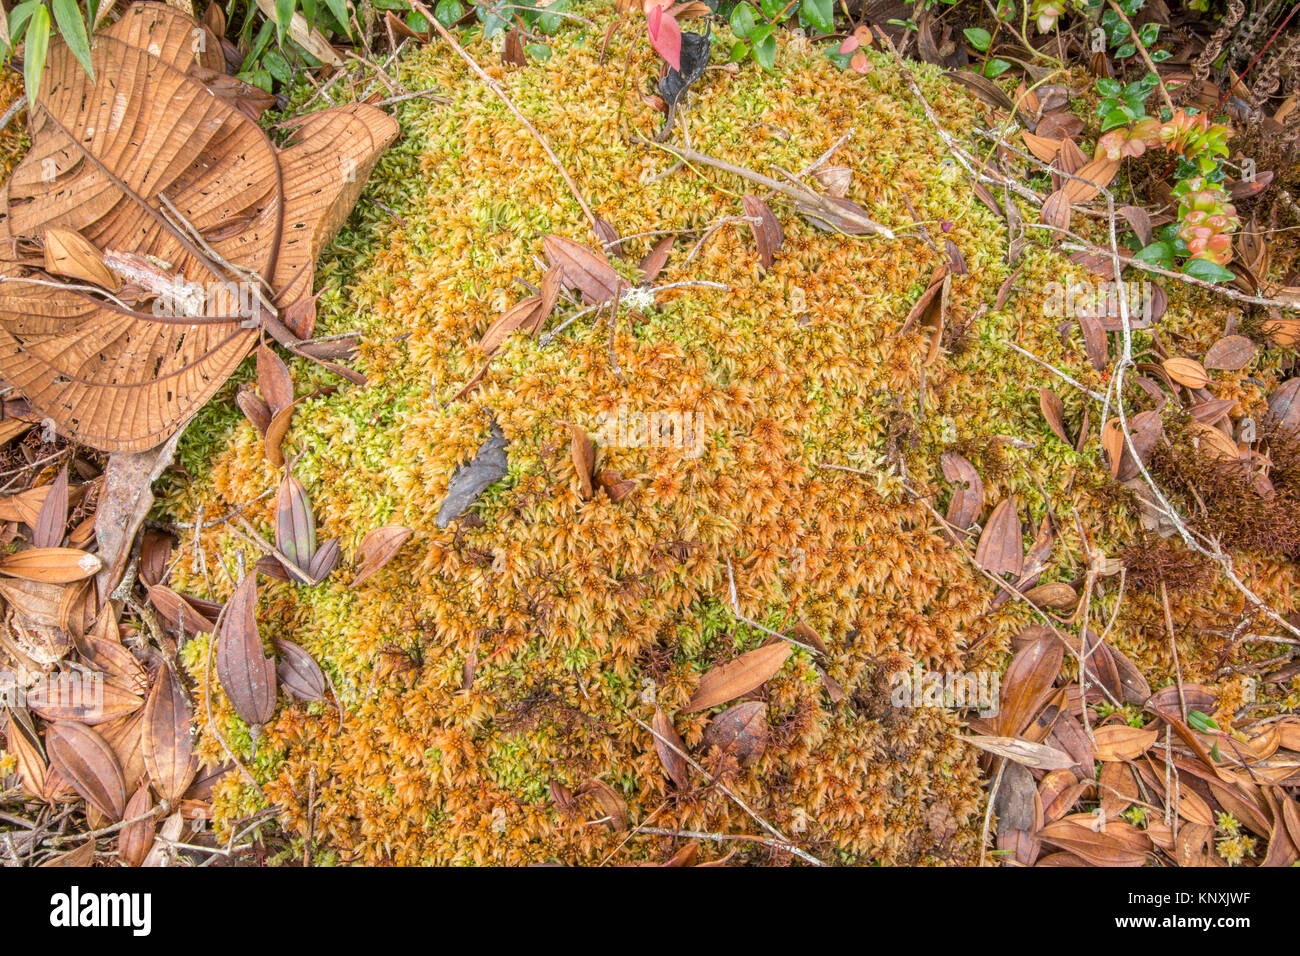 Sphagnum moss growing on the floor of humid montane rainforest in the biodiverse Cordillera del Condor, the southern Ecuarorian Amazon. Stock Photo